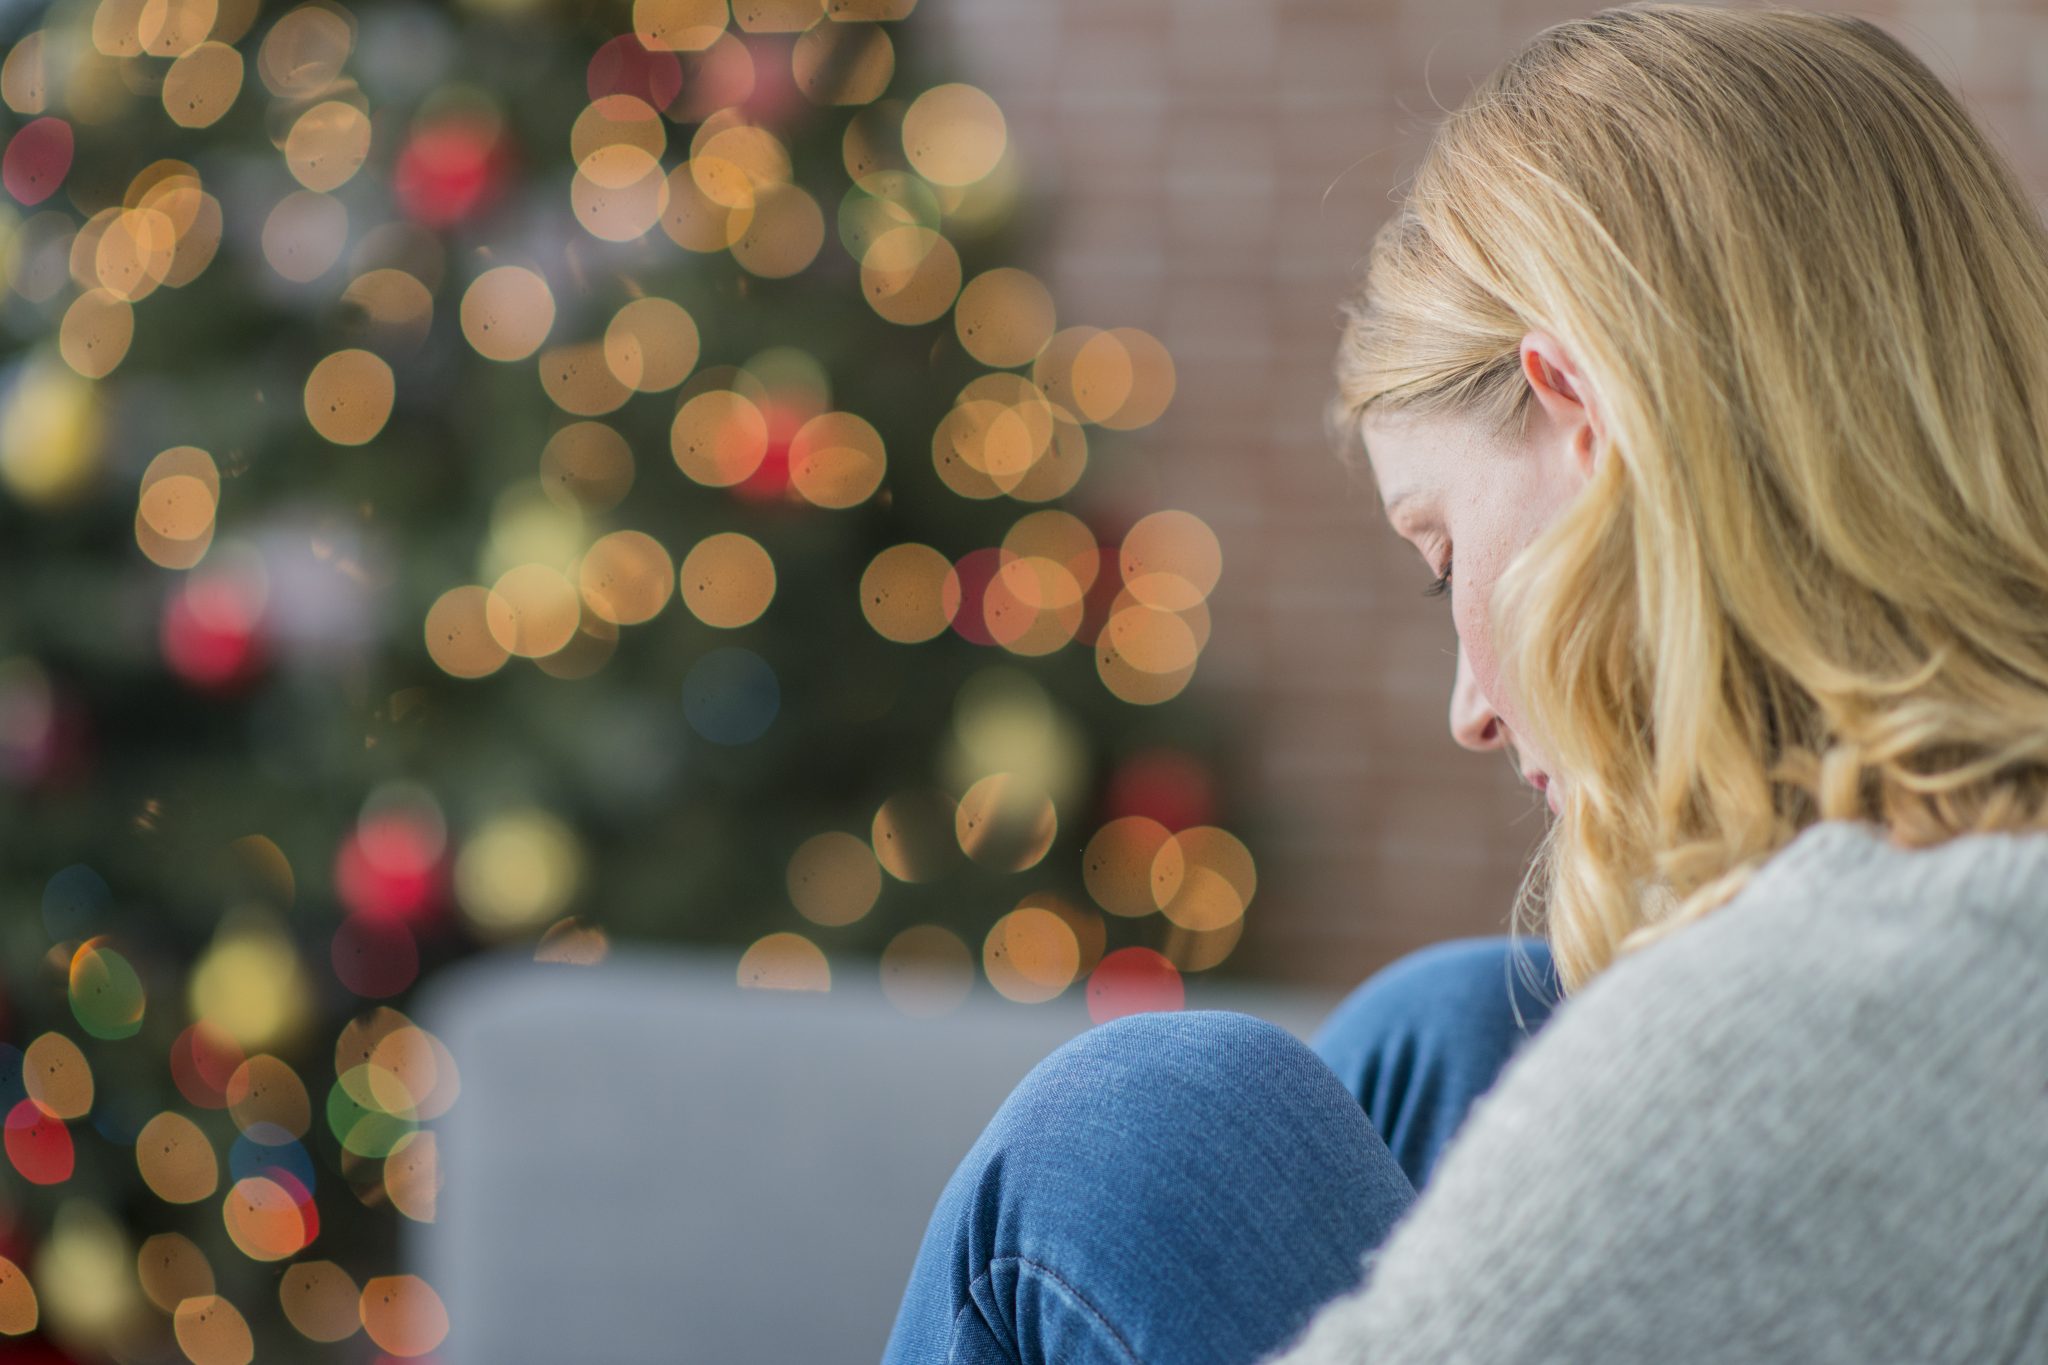 People In The UK Feel The Impact Of Loneliness During The Festive Season